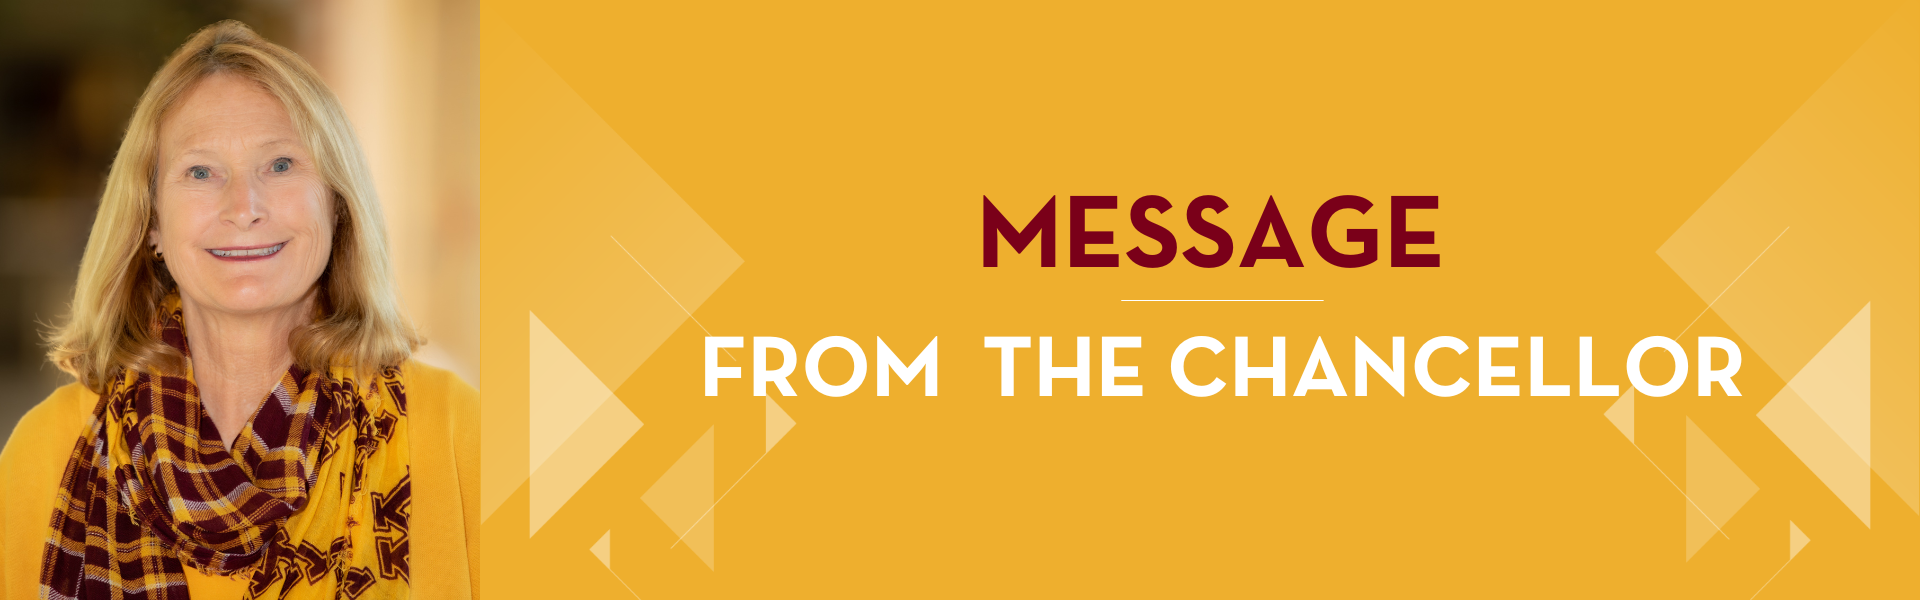 Message from the Chancellor - Mary Holz-Clause